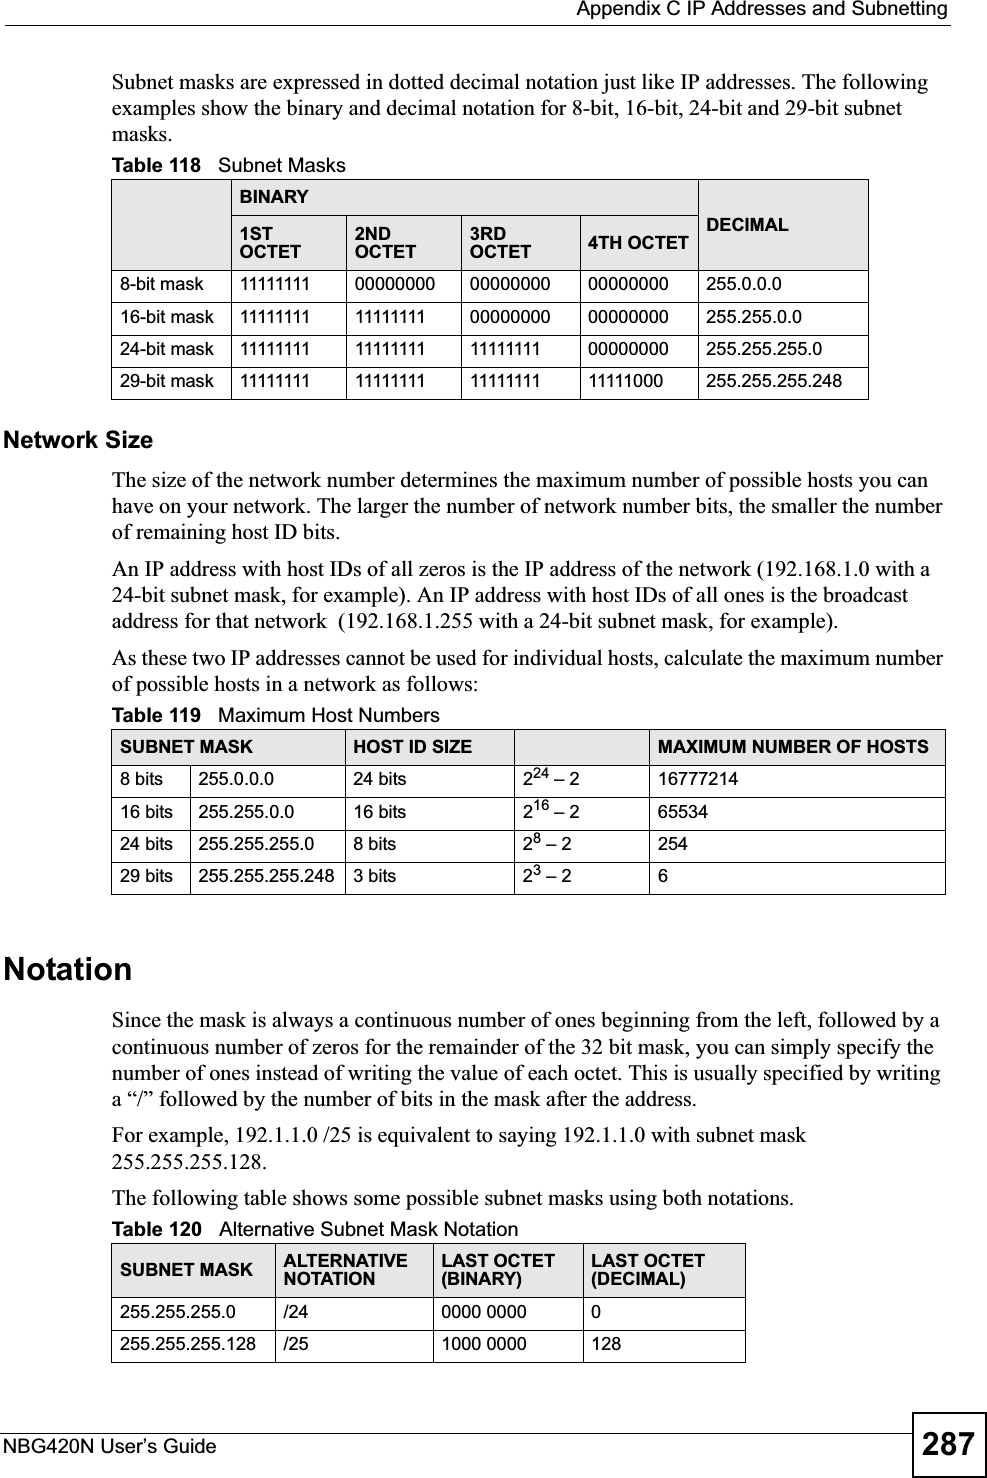  Appendix C IP Addresses and SubnettingNBG420N User’s Guide 287Subnet masks are expressed in dotted decimal notation just like IP addresses. The following examples show the binary and decimal notation for 8-bit, 16-bit, 24-bit and 29-bit subnet masks. Network SizeThe size of the network number determines the maximum number of possible hosts you can have on your network. The larger the number of network number bits, the smaller the number of remaining host ID bits. An IP address with host IDs of all zeros is the IP address of the network (192.168.1.0 with a 24-bit subnet mask, for example). An IP address with host IDs of all ones is the broadcast address for that network  (192.168.1.255 with a 24-bit subnet mask, for example).As these two IP addresses cannot be used for individual hosts, calculate the maximum number of possible hosts in a network as follows:NotationSince the mask is always a continuous number of ones beginning from the left, followed by a continuous number of zeros for the remainder of the 32 bit mask, you can simply specify the number of ones instead of writing the value of each octet. This is usually specified by writing a “/” followed by the number of bits in the mask after the address. For example, 192.1.1.0 /25 is equivalent to saying 192.1.1.0 with subnet mask 255.255.255.128. The following table shows some possible subnet masks using both notations. Table 118   Subnet MasksBINARYDECIMAL1ST OCTET2ND OCTET3RD OCTET 4TH OCTET8-bit mask 11111111 00000000 00000000 00000000 255.0.0.016-bit mask 11111111 11111111 00000000 00000000 255.255.0.024-bit mask 11111111 11111111 11111111 00000000 255.255.255.029-bit mask 11111111 11111111 11111111 11111000 255.255.255.248Table 119   Maximum Host NumbersSUBNET MASK HOST ID SIZE MAXIMUM NUMBER OF HOSTS8 bits 255.0.0.0 24 bits 224 – 2 1677721416 bits 255.255.0.0 16 bits 216 – 2 6553424 bits 255.255.255.0 8 bits 28 – 2 25429 bits 255.255.255.248 3 bits 23 – 2 6Table 120   Alternative Subnet Mask NotationSUBNET MASK ALTERNATIVE NOTATIONLAST OCTET (BINARY)LAST OCTET (DECIMAL)255.255.255.0 /24 0000 0000 0255.255.255.128 /25 1000 0000 128